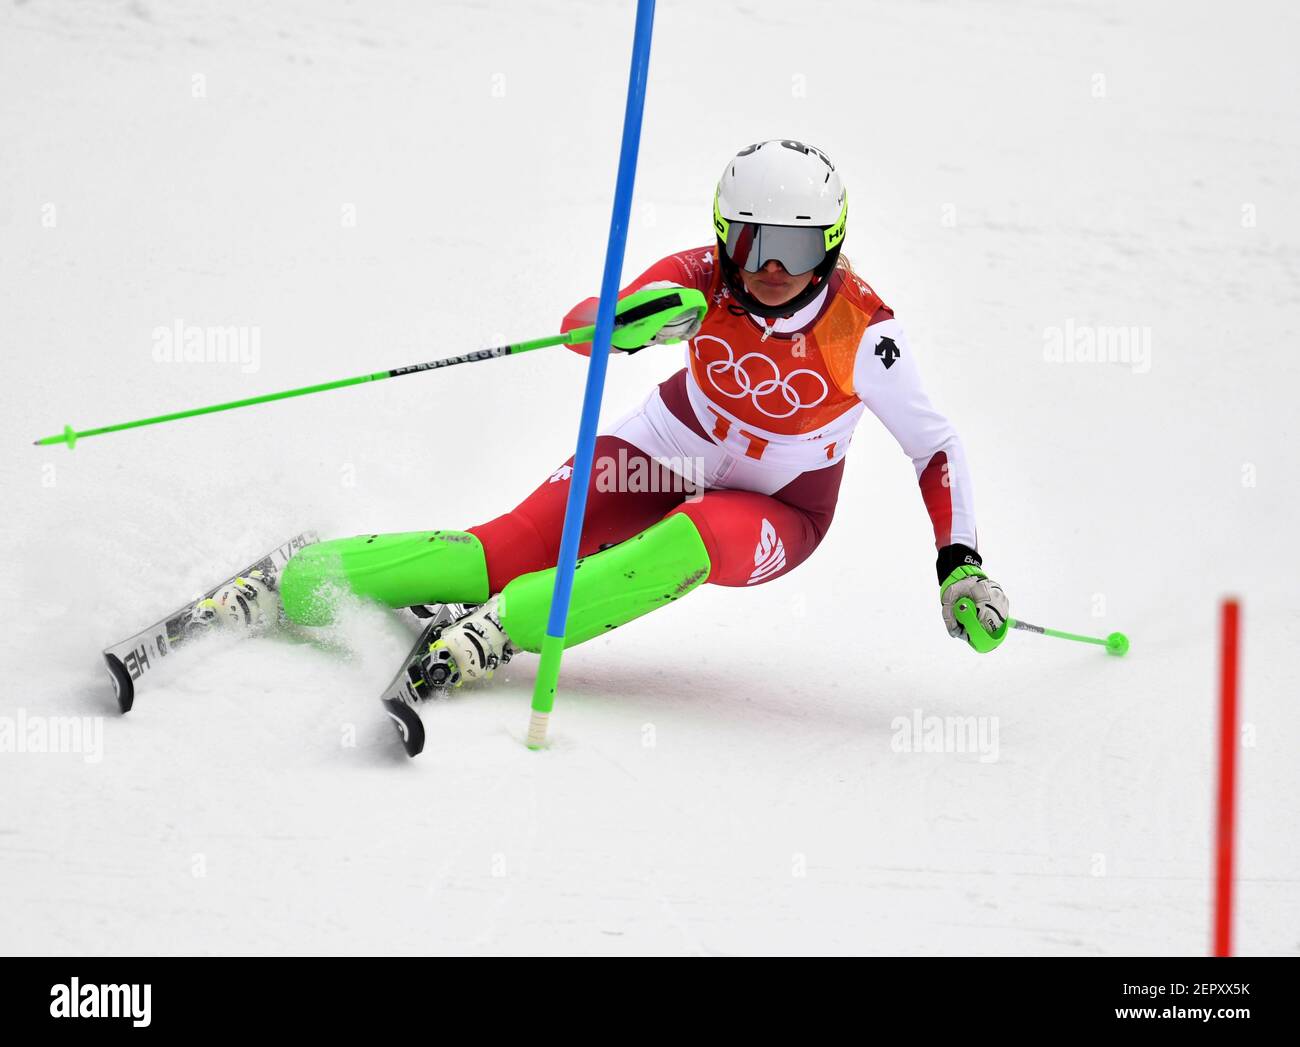 Feb 22, 2018; Pyeongchang, South Korea; Denise Feierabend (SUI) competes in the women's alpine combined slalom event during the Pyeongchang 2018 Olympic Winter Games at Jeongseon Alpine Centre. Mandatory Credit: Eric Bolte-USA TODAY Sports Stock Photo